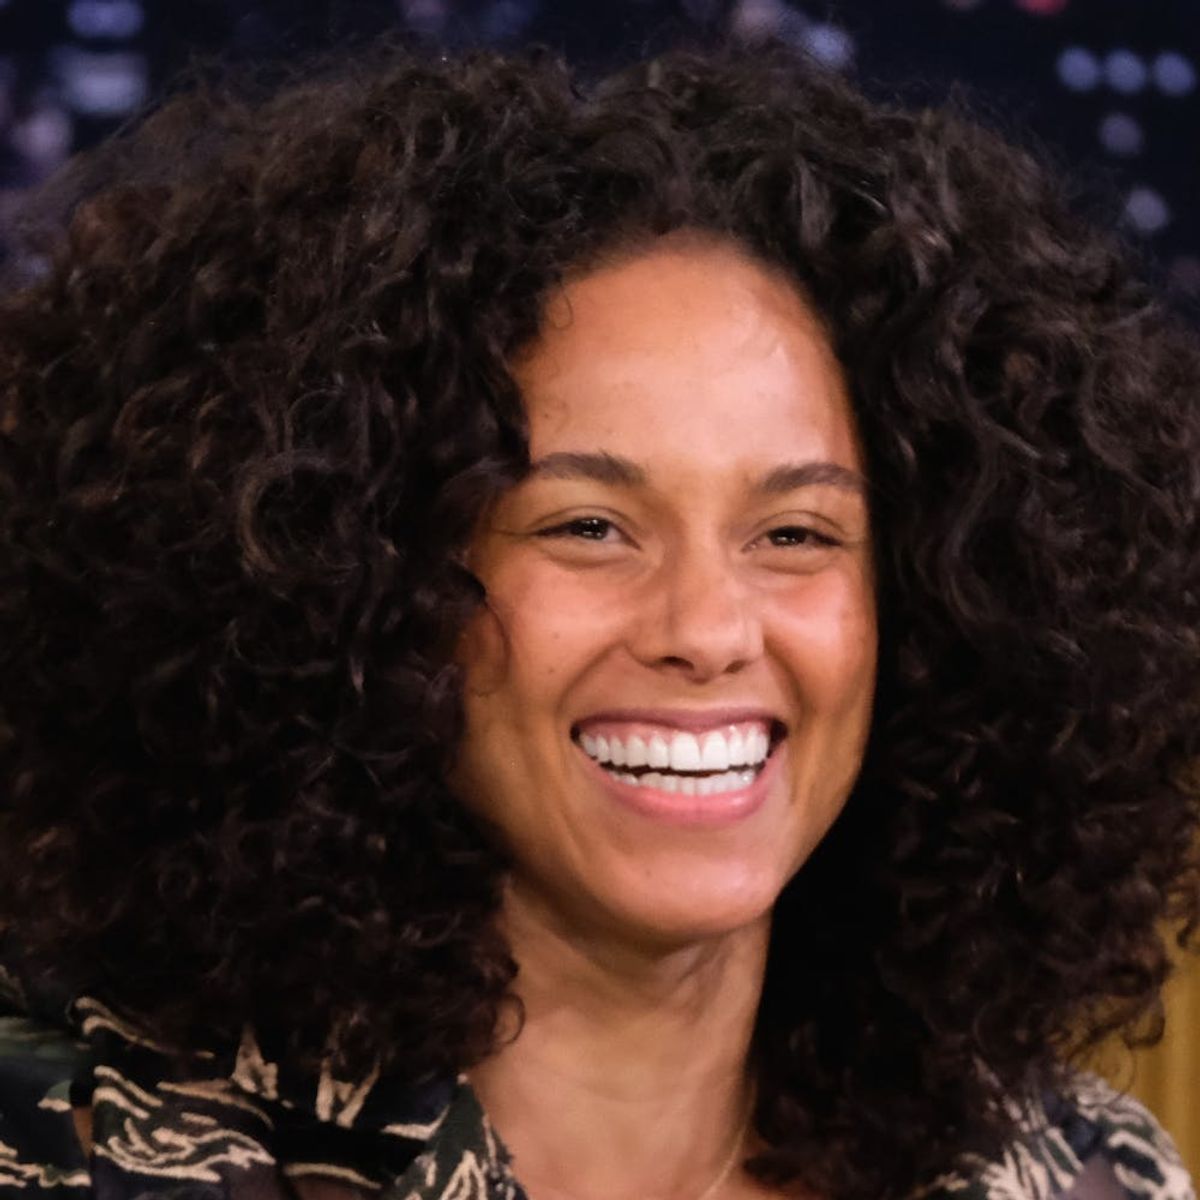 This Is What Alicia Keys Had to Say When Adam Levine Caught Her Wearing Makeup